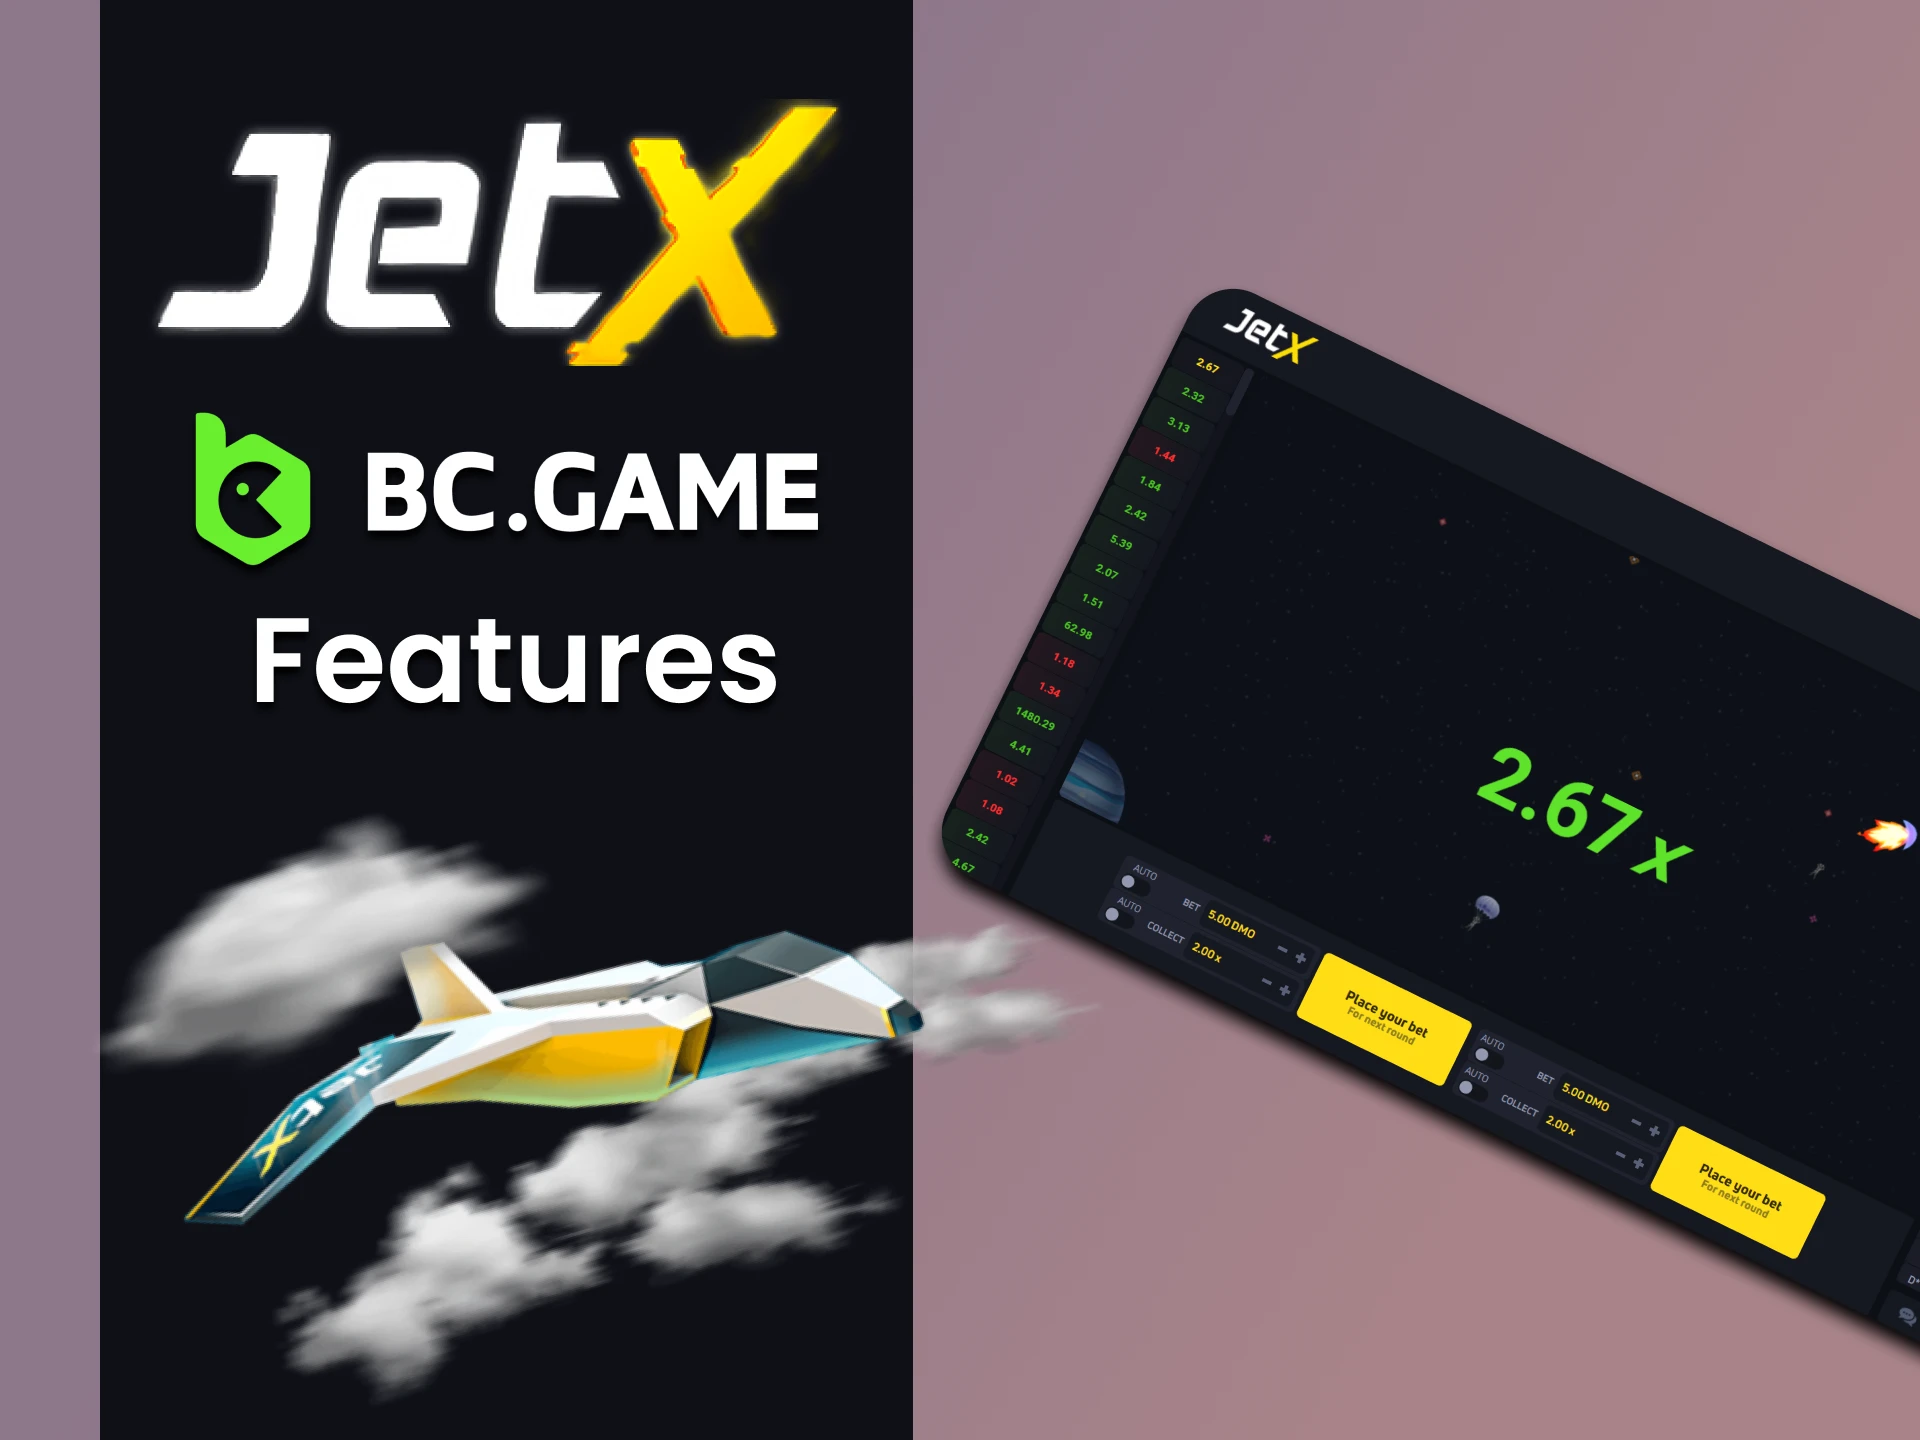 We will tell you about the possibilities of playing JetX on BC Game.